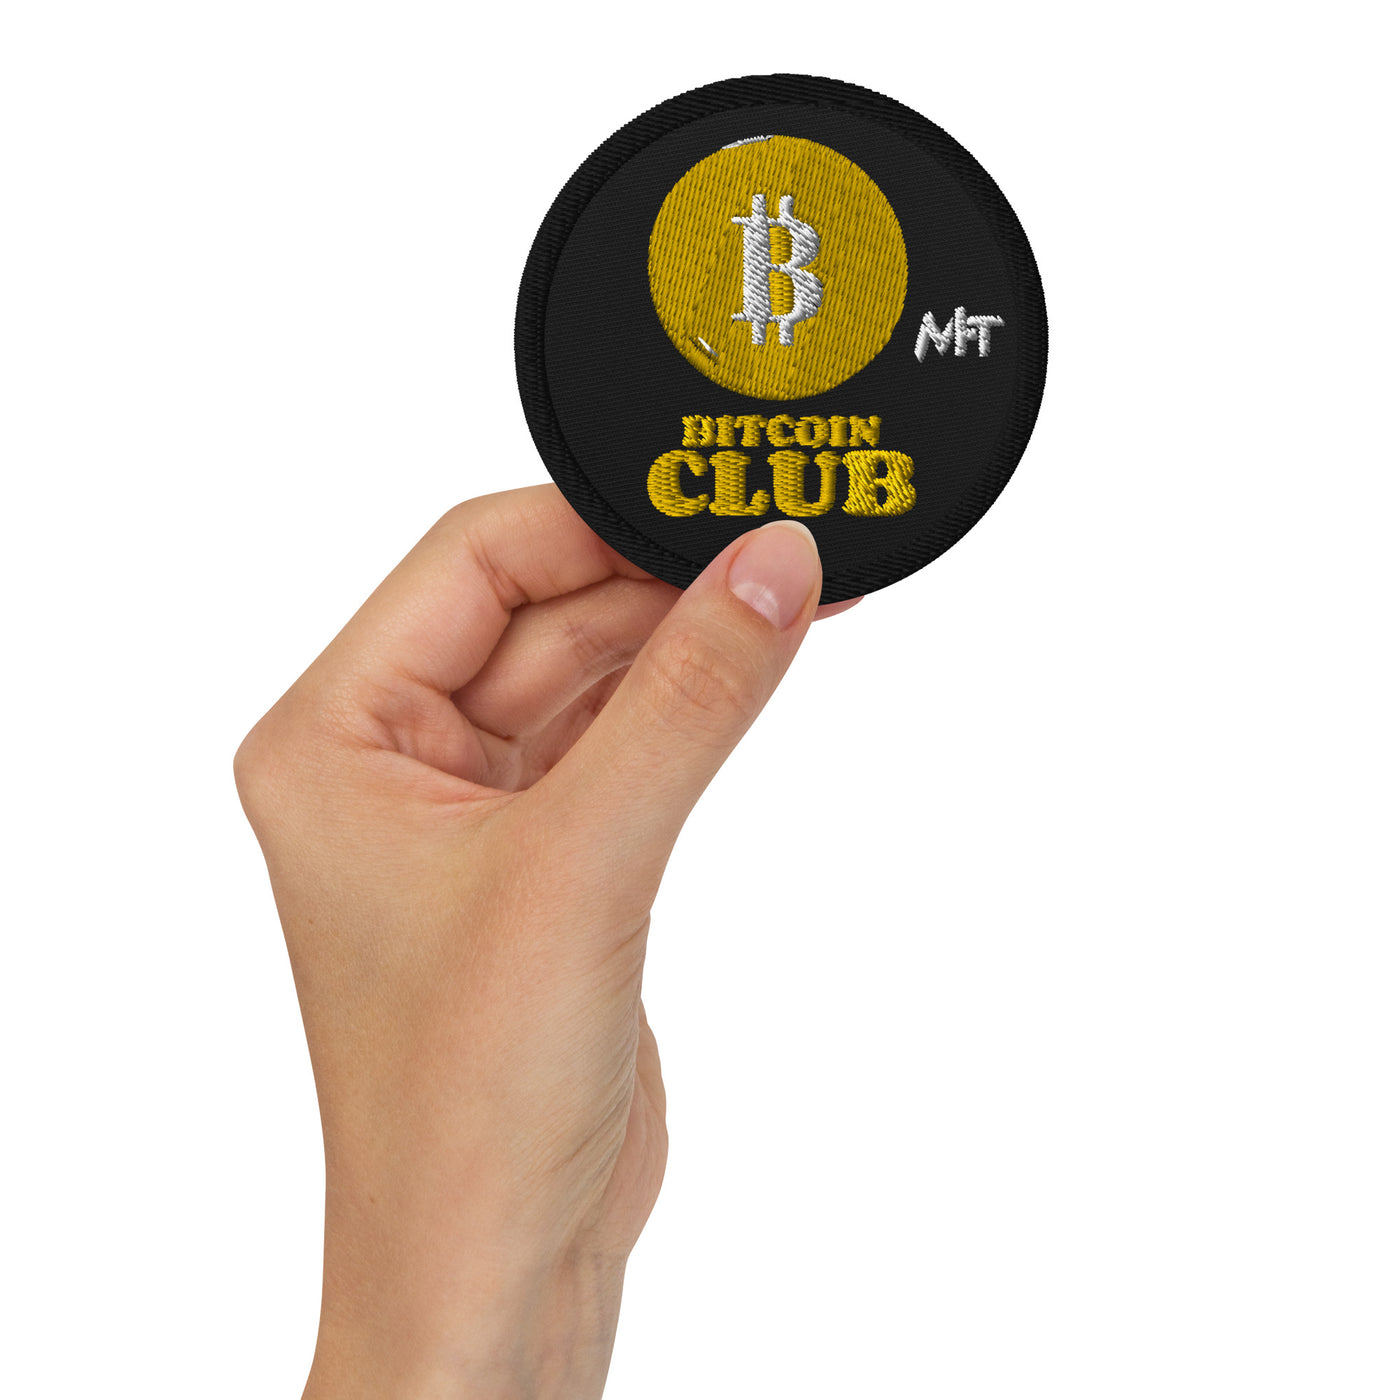 BITCOIN CLUB V1 - Embroidered patches